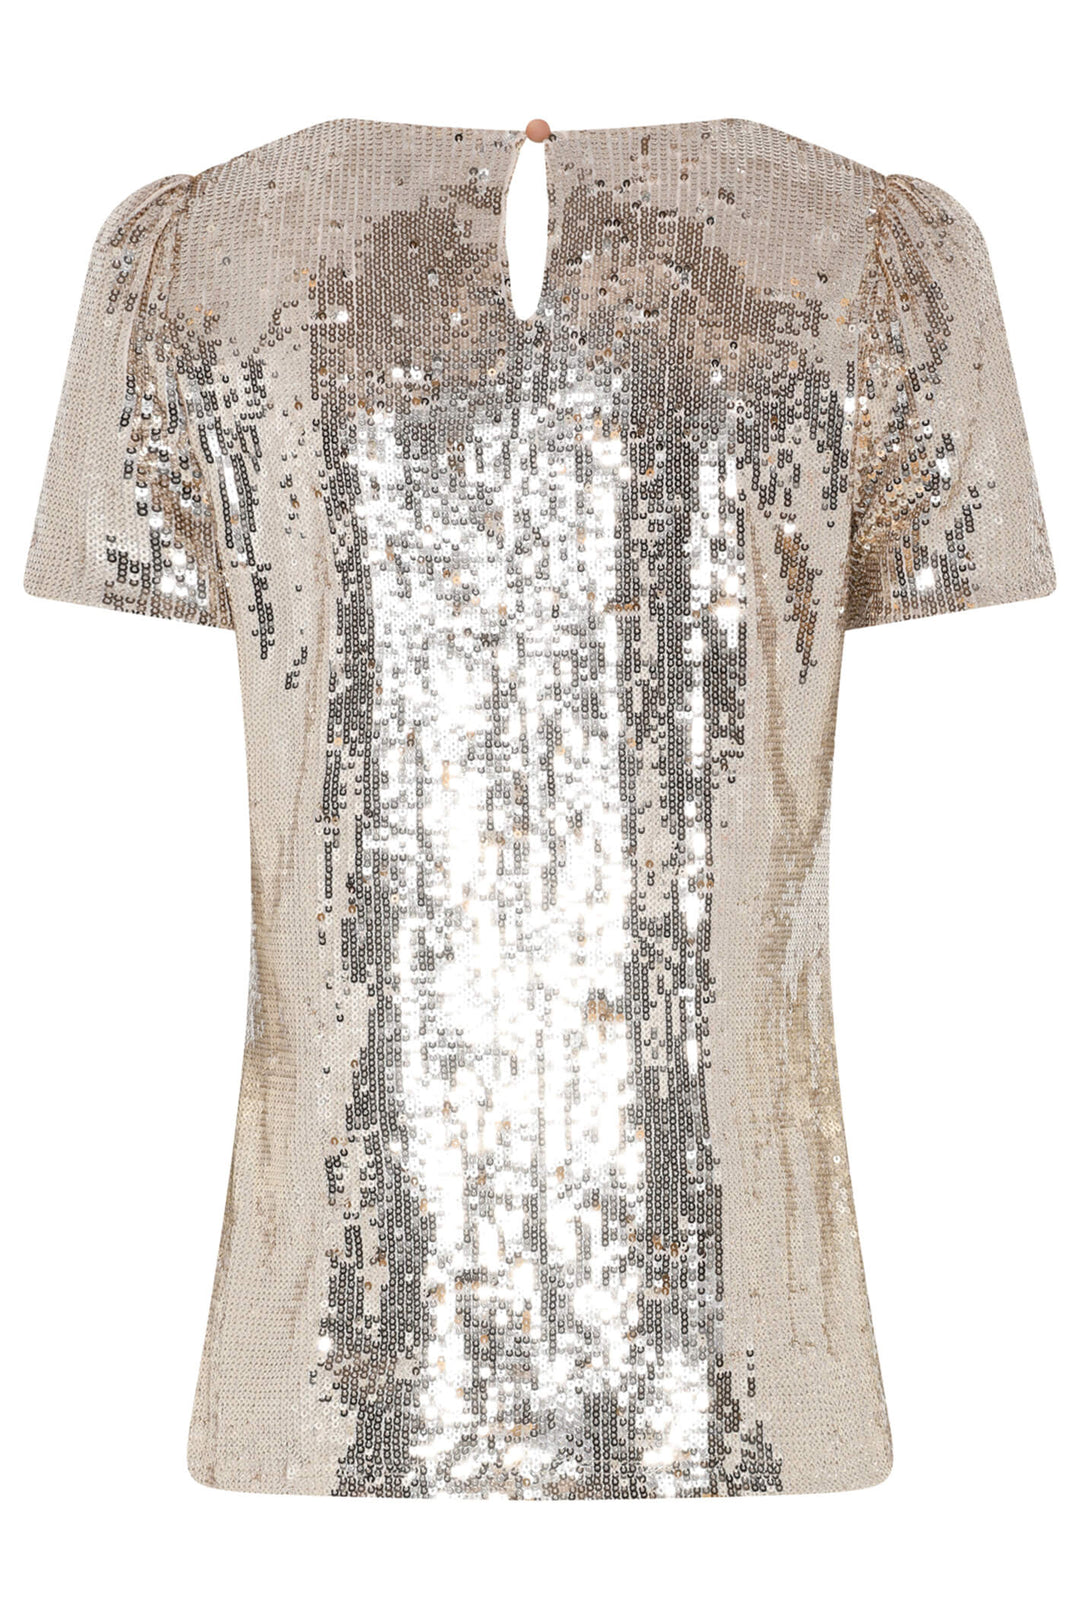 SEQUIN SHORTS - Soft gold